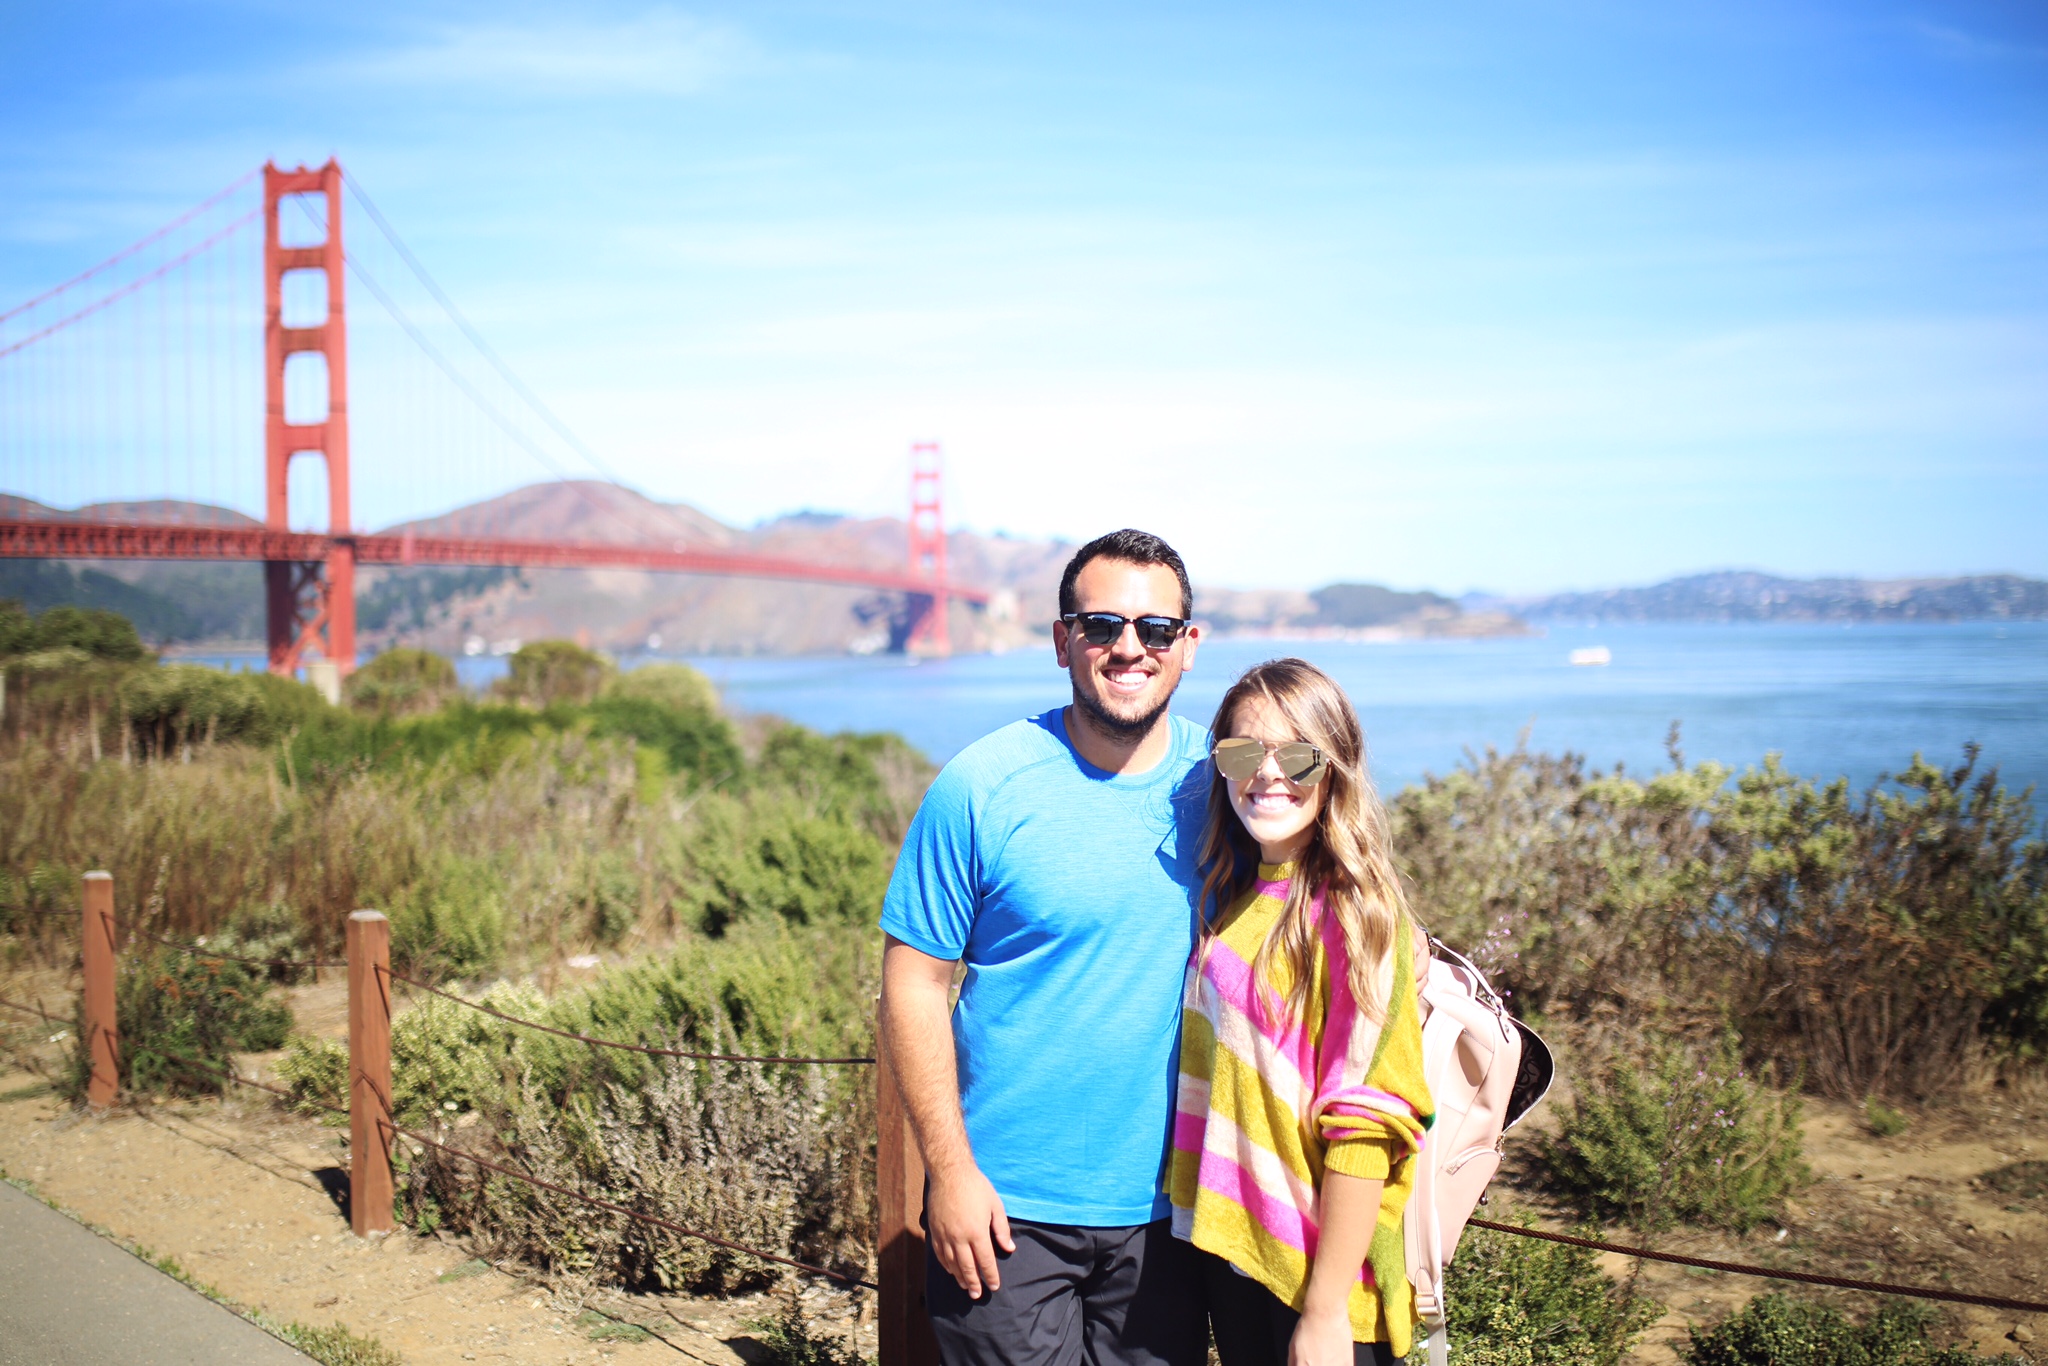 San Francisco Travel Guide / where to stay, eat & play 